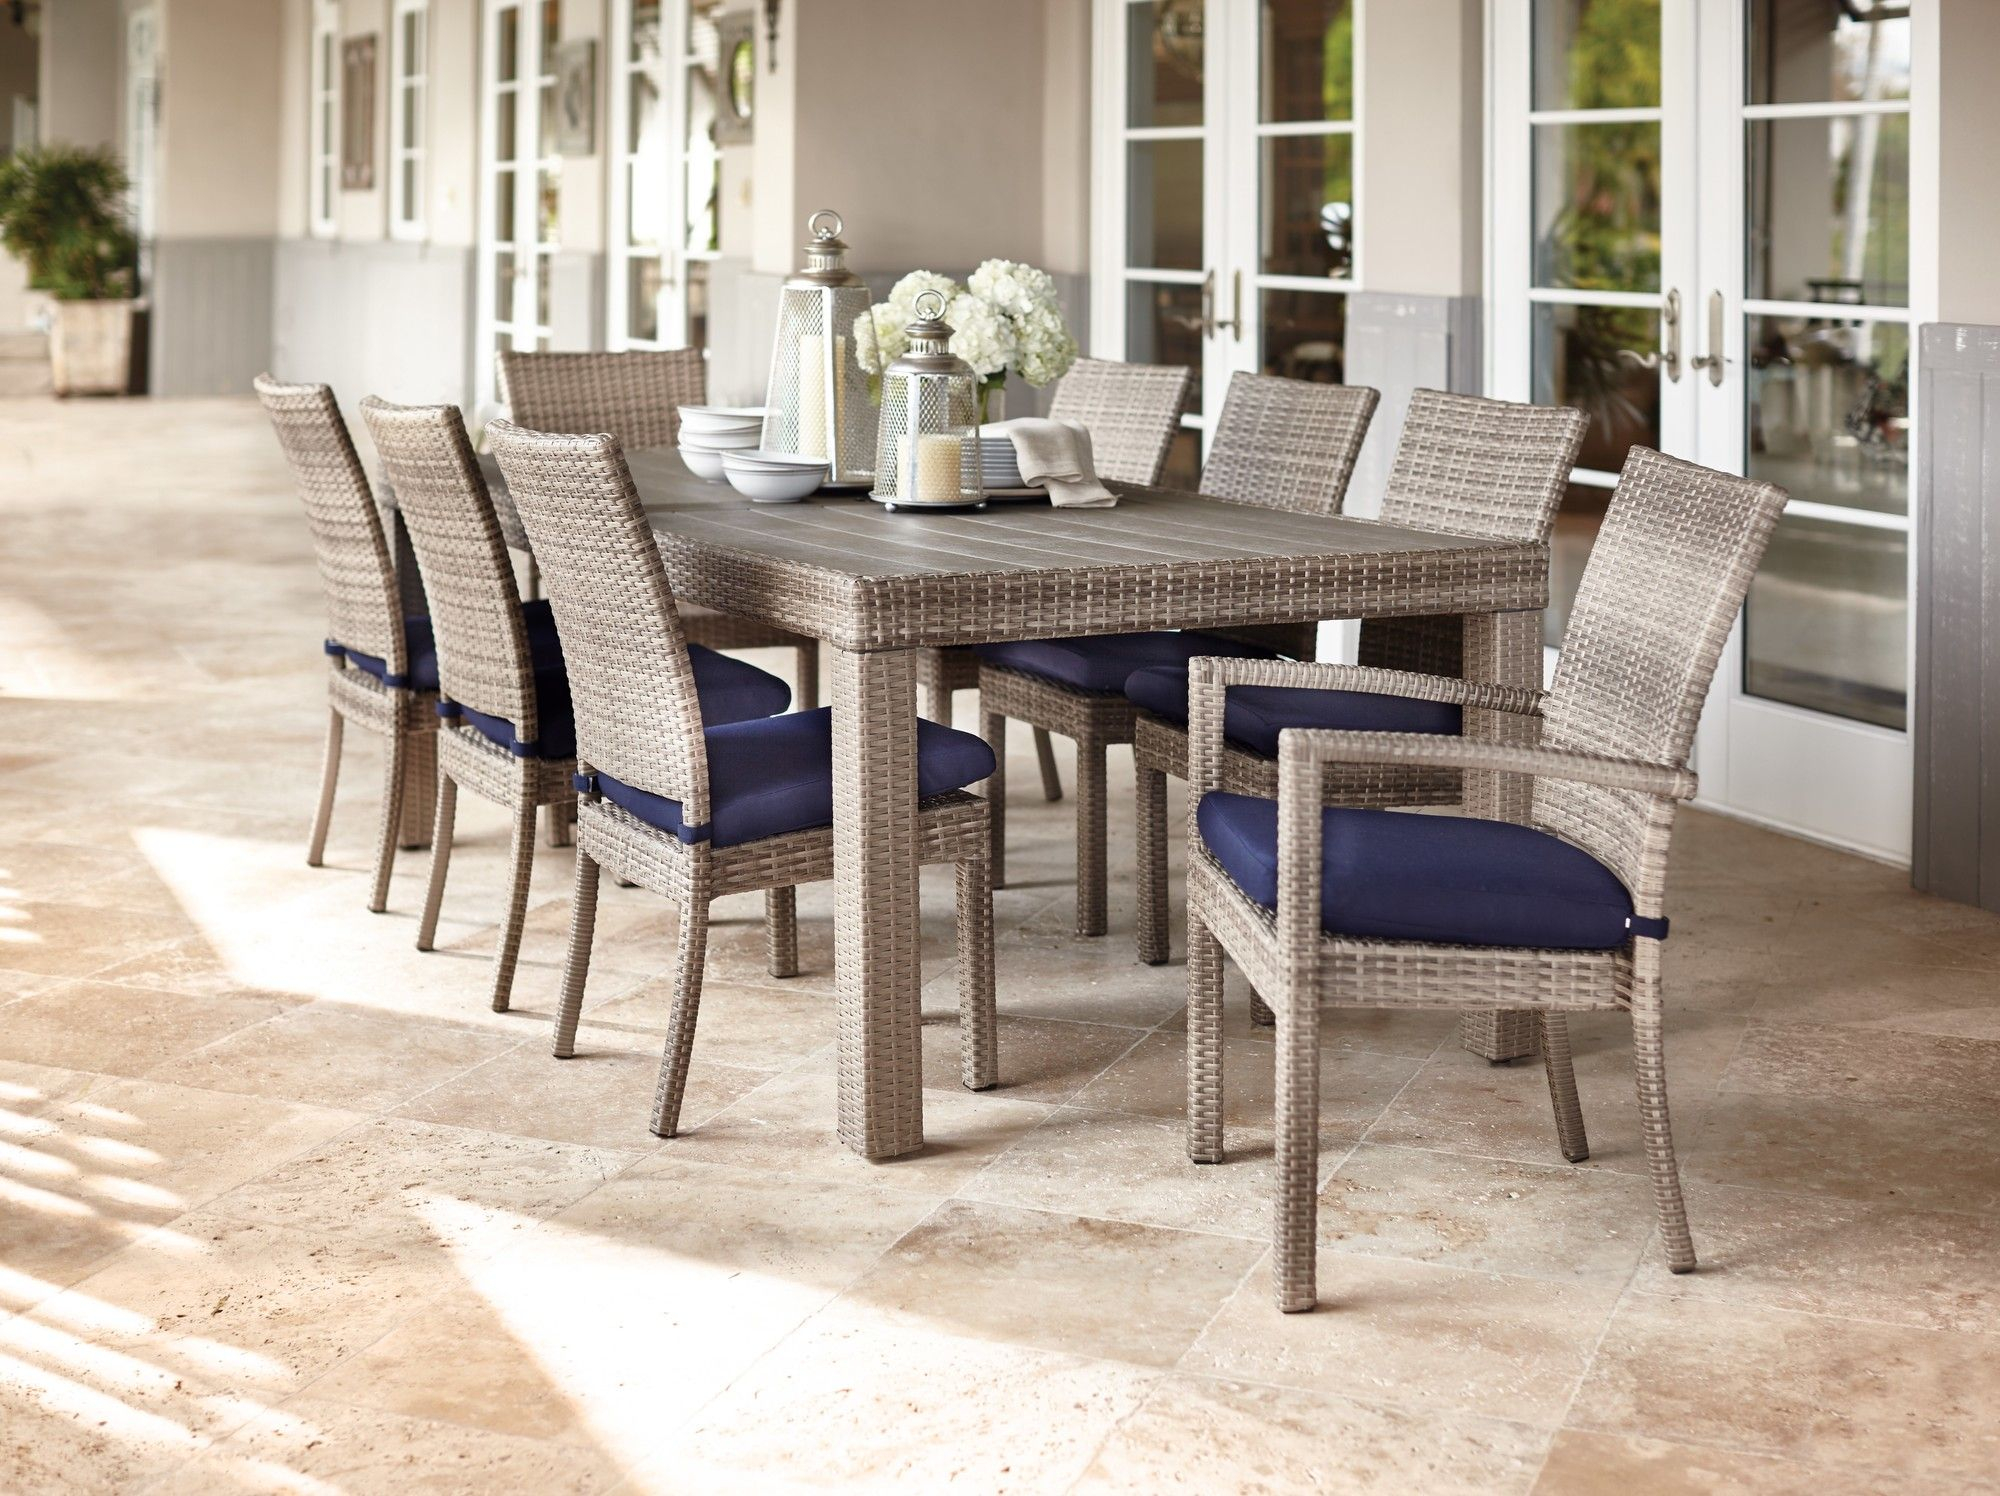 Castelli 9 Piece Sunbrella Dining Set With Cushions Dining for dimensions 2000 X 1496